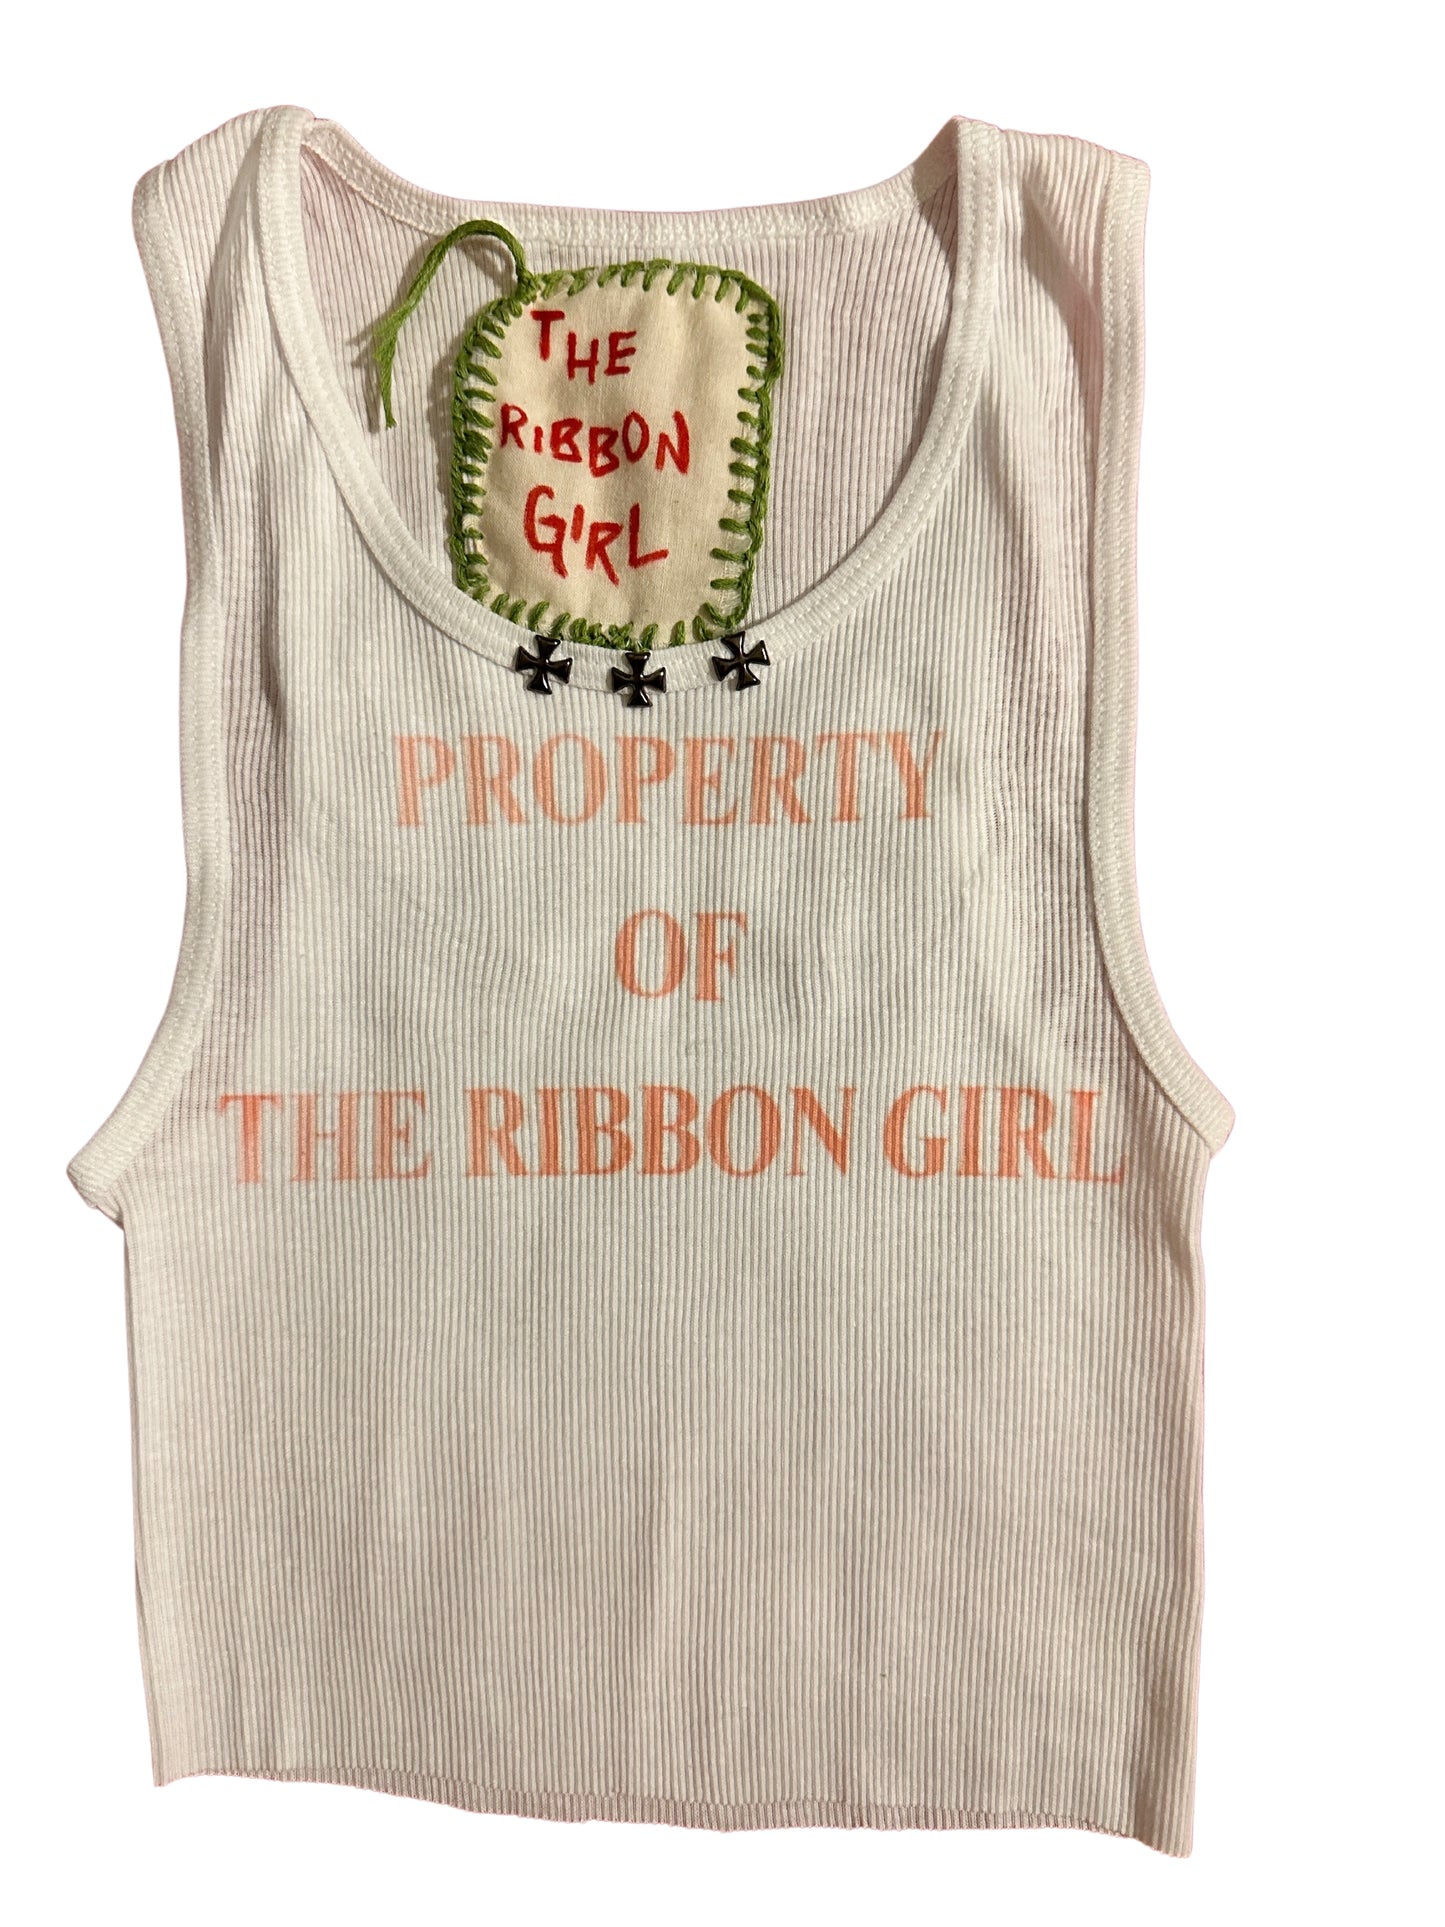 PROPERTY OF THE RIBBON GIRL 2.0